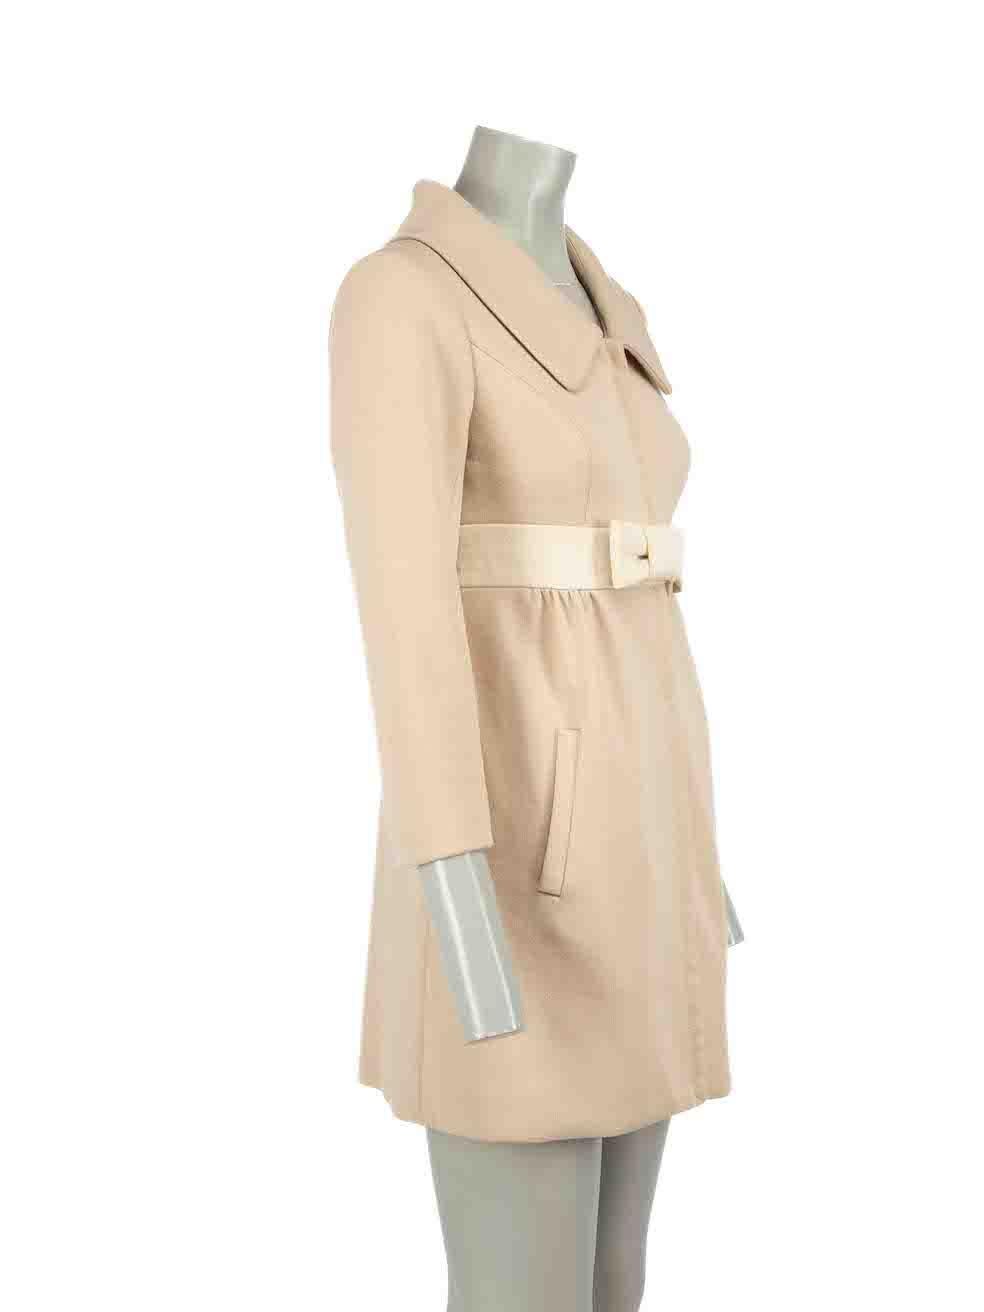 CONDITION is Very good. Minimal wear to coat is evident. Minimal wear to the front with a small hole to the knit above the hem. Small satins is visible to back of internal hemline on this used Smythe designer resale item.
 
Details
Beige
Wool
Mid